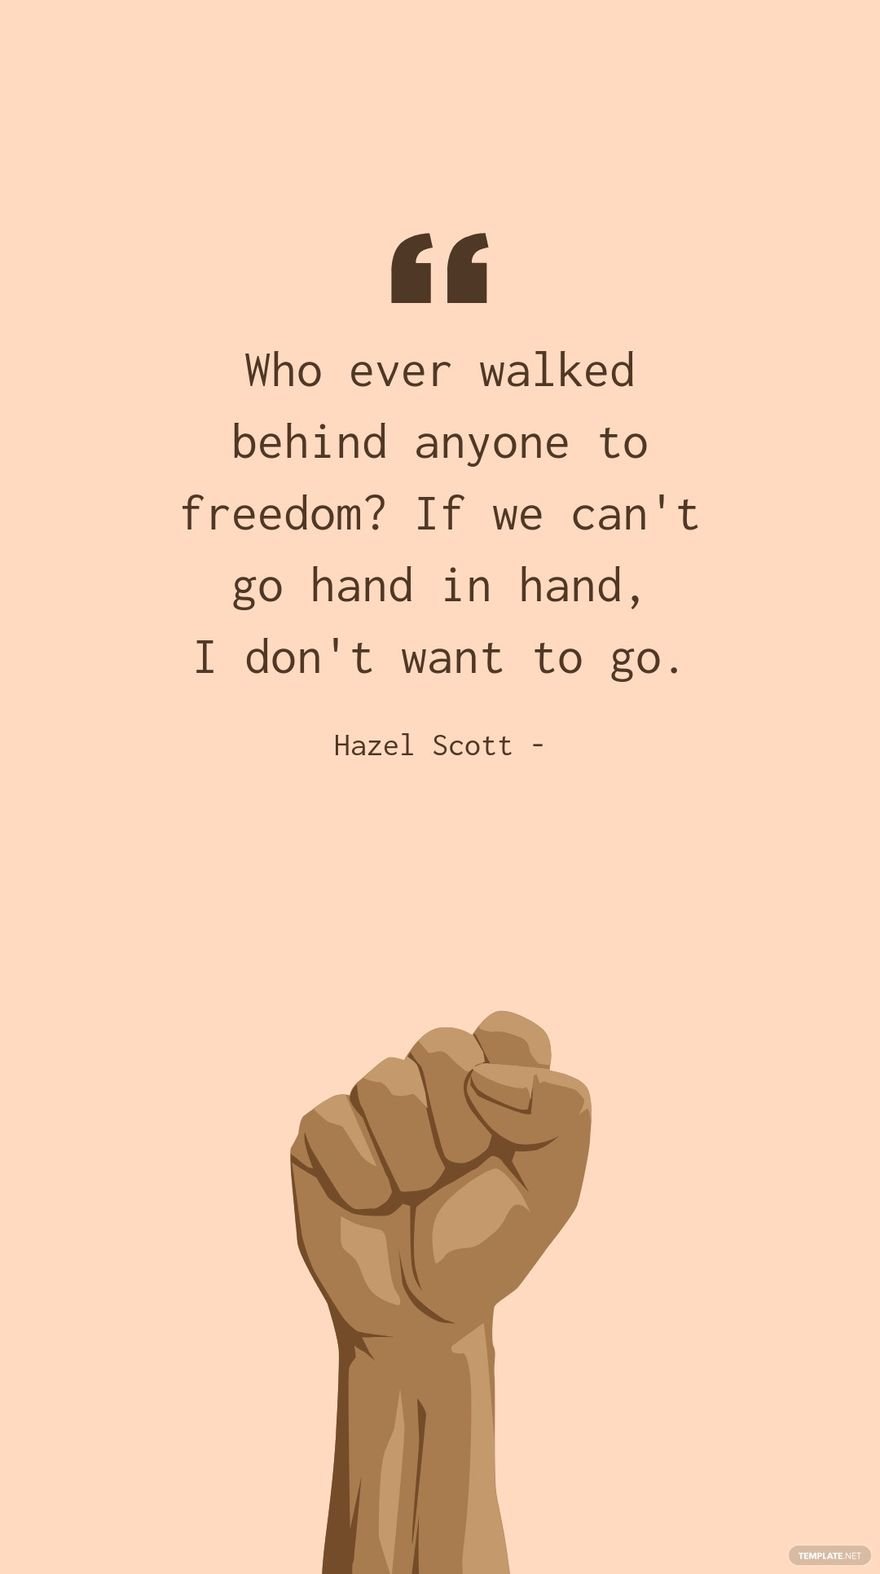 Hazel Scott - Who ever walked behind anyone to freedom? If we can't go hand in hand, I don't want to go.